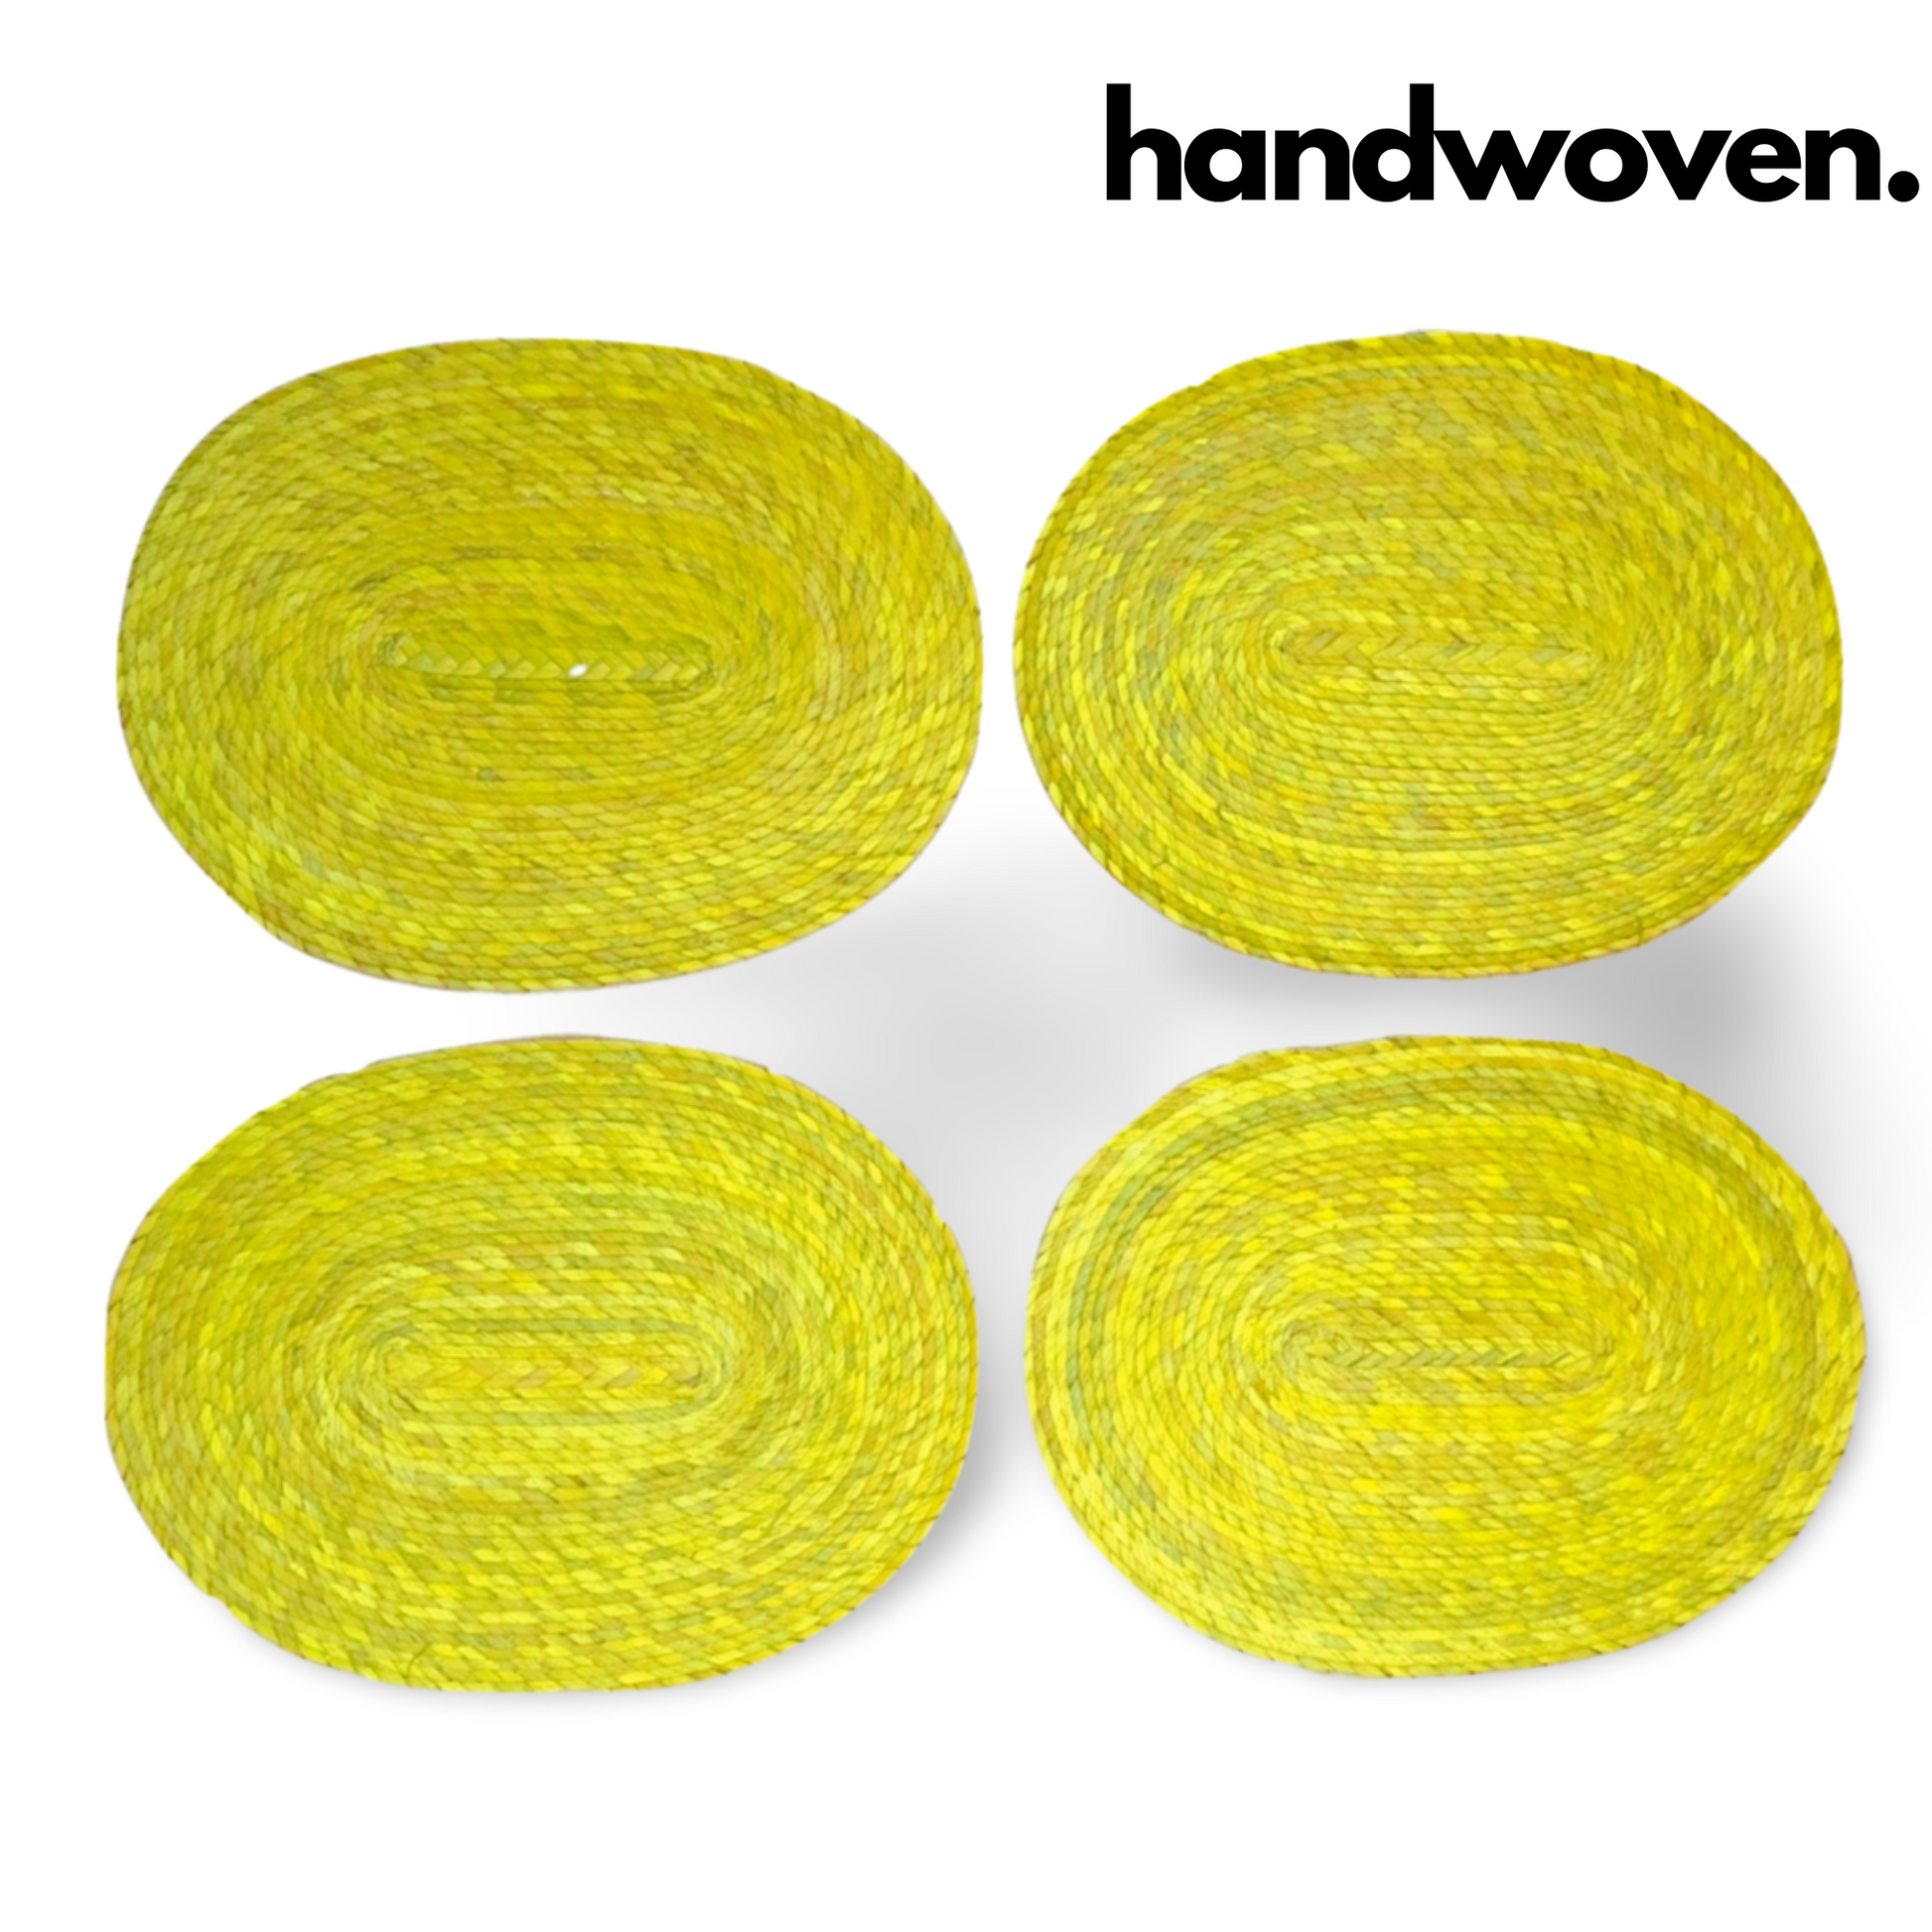 Set of 4 vibrant yellow placemats, handwoven in Mexico from eco-friendly palm leaves, perfect for indoor or outdoor dining.